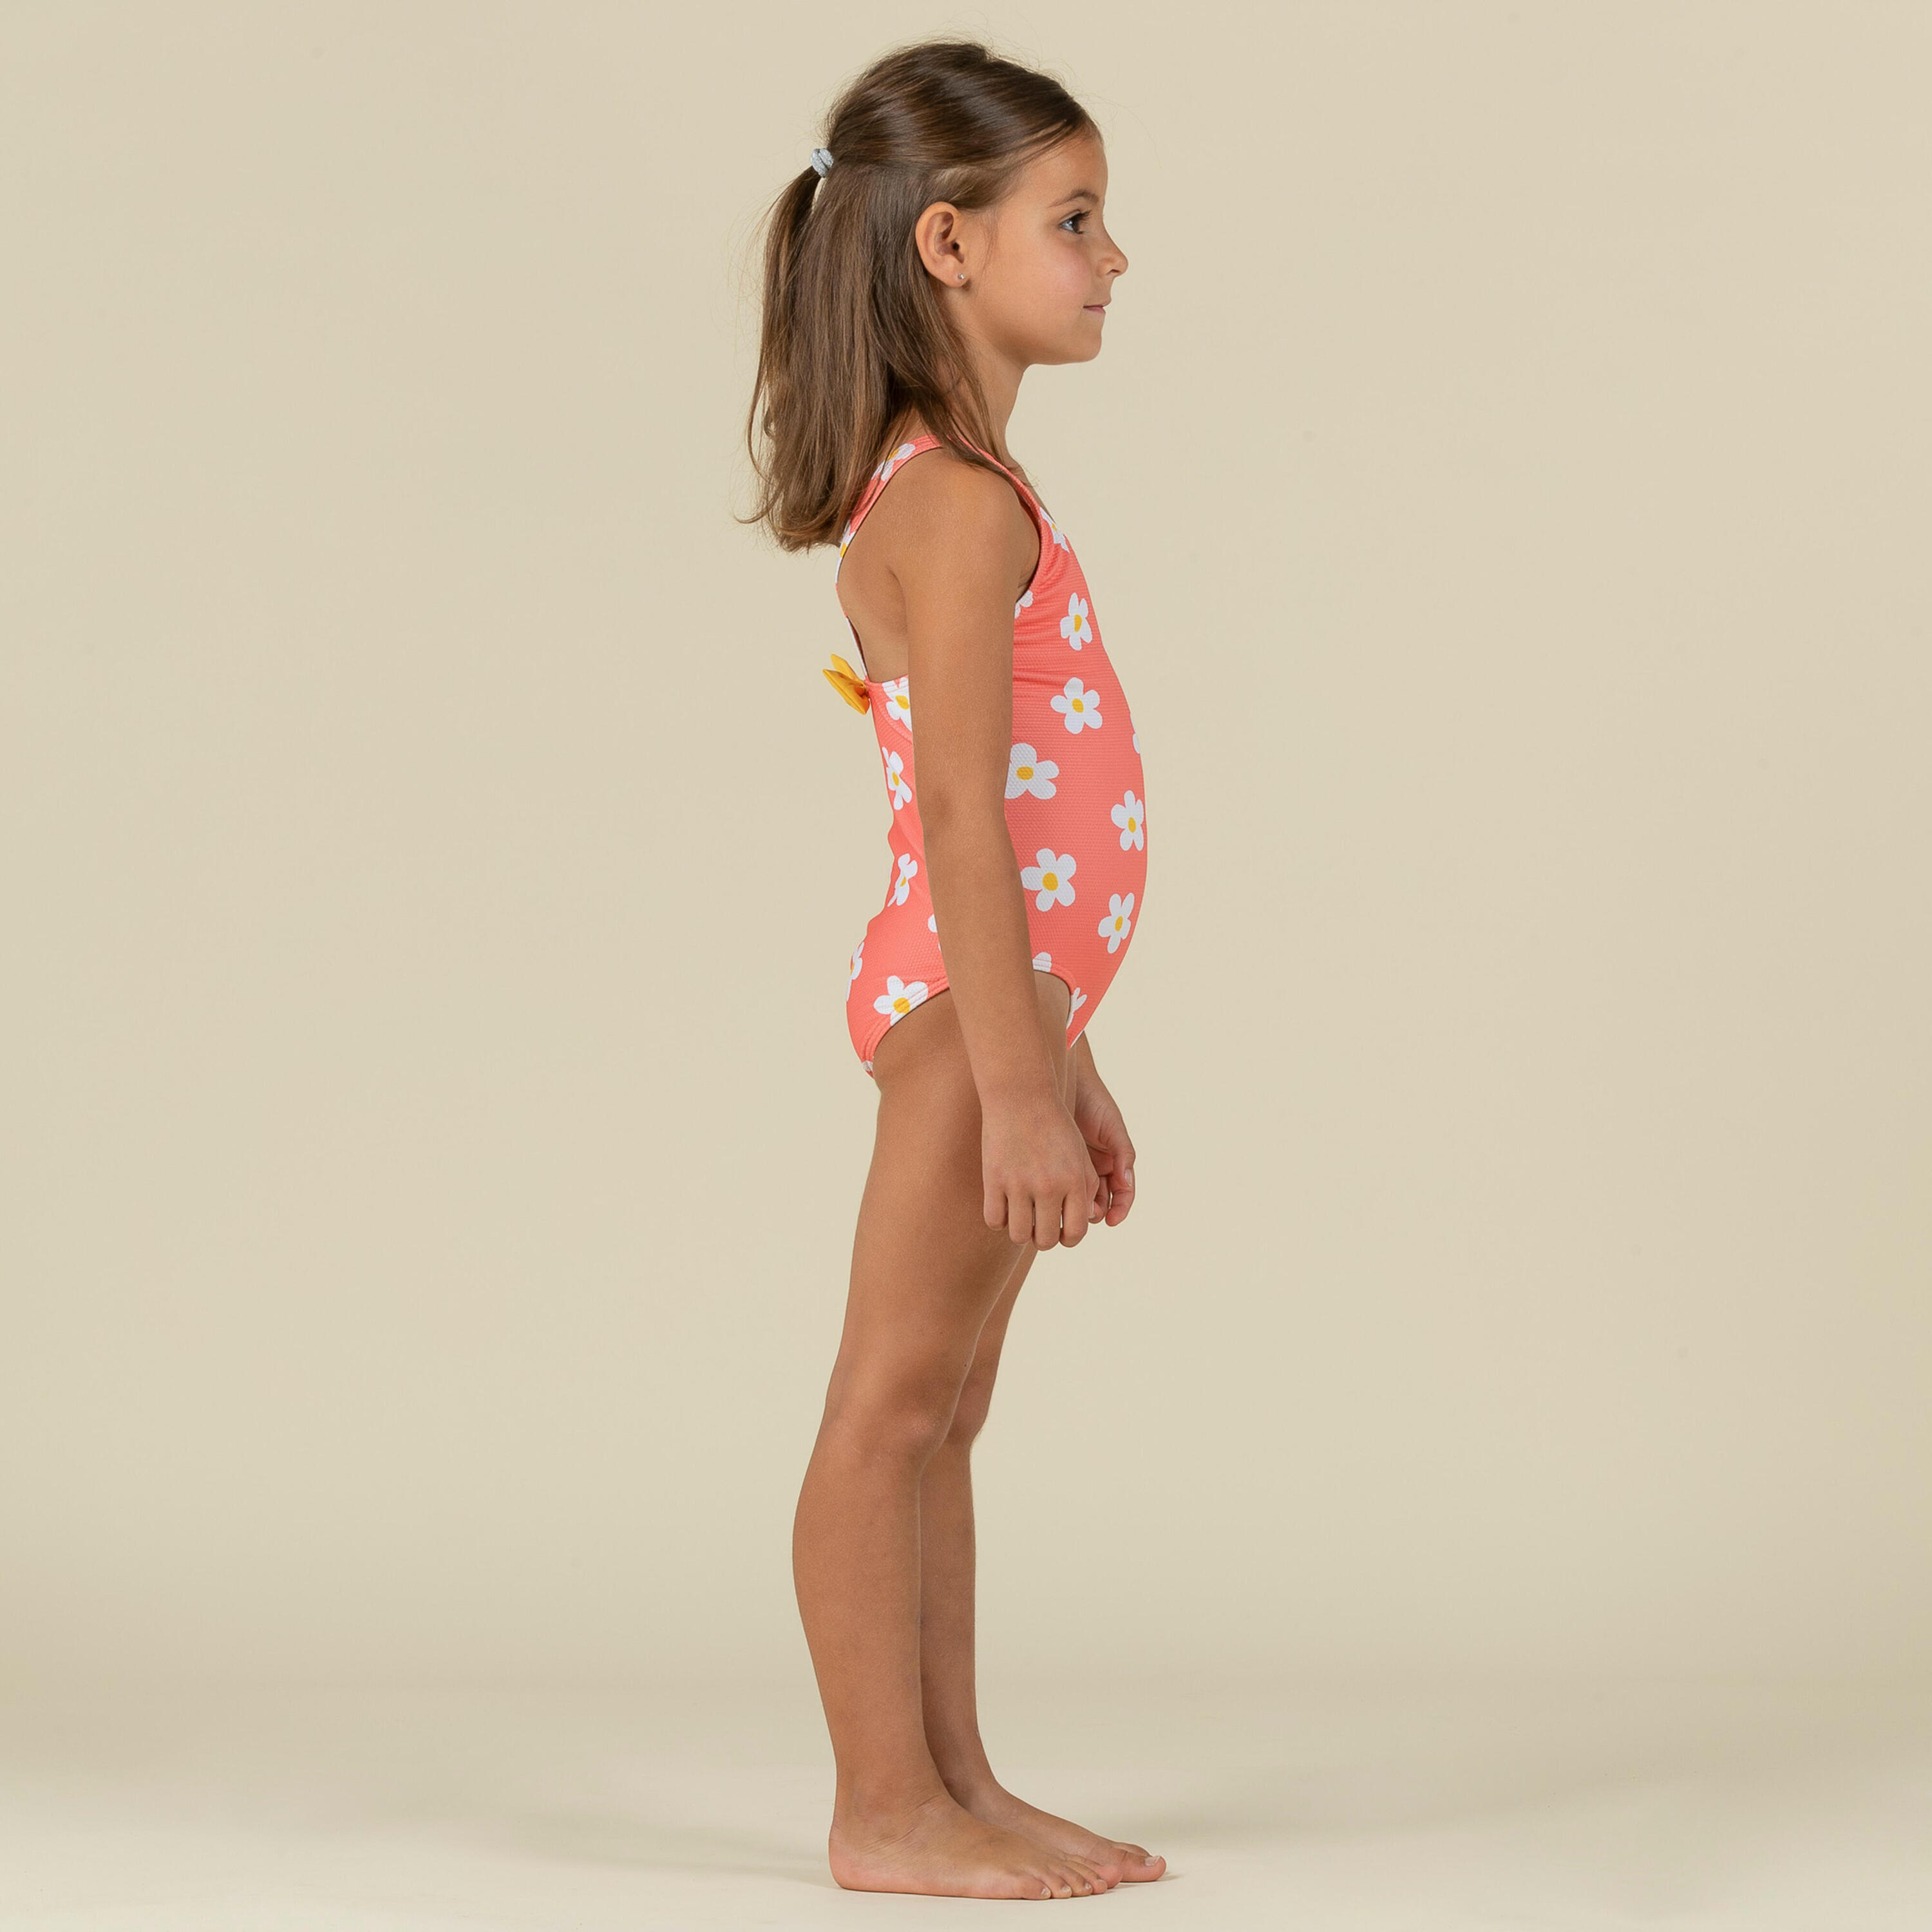 Baby Girls' 1-Piece Swimsuit waffle texture coral Flower print 3/12